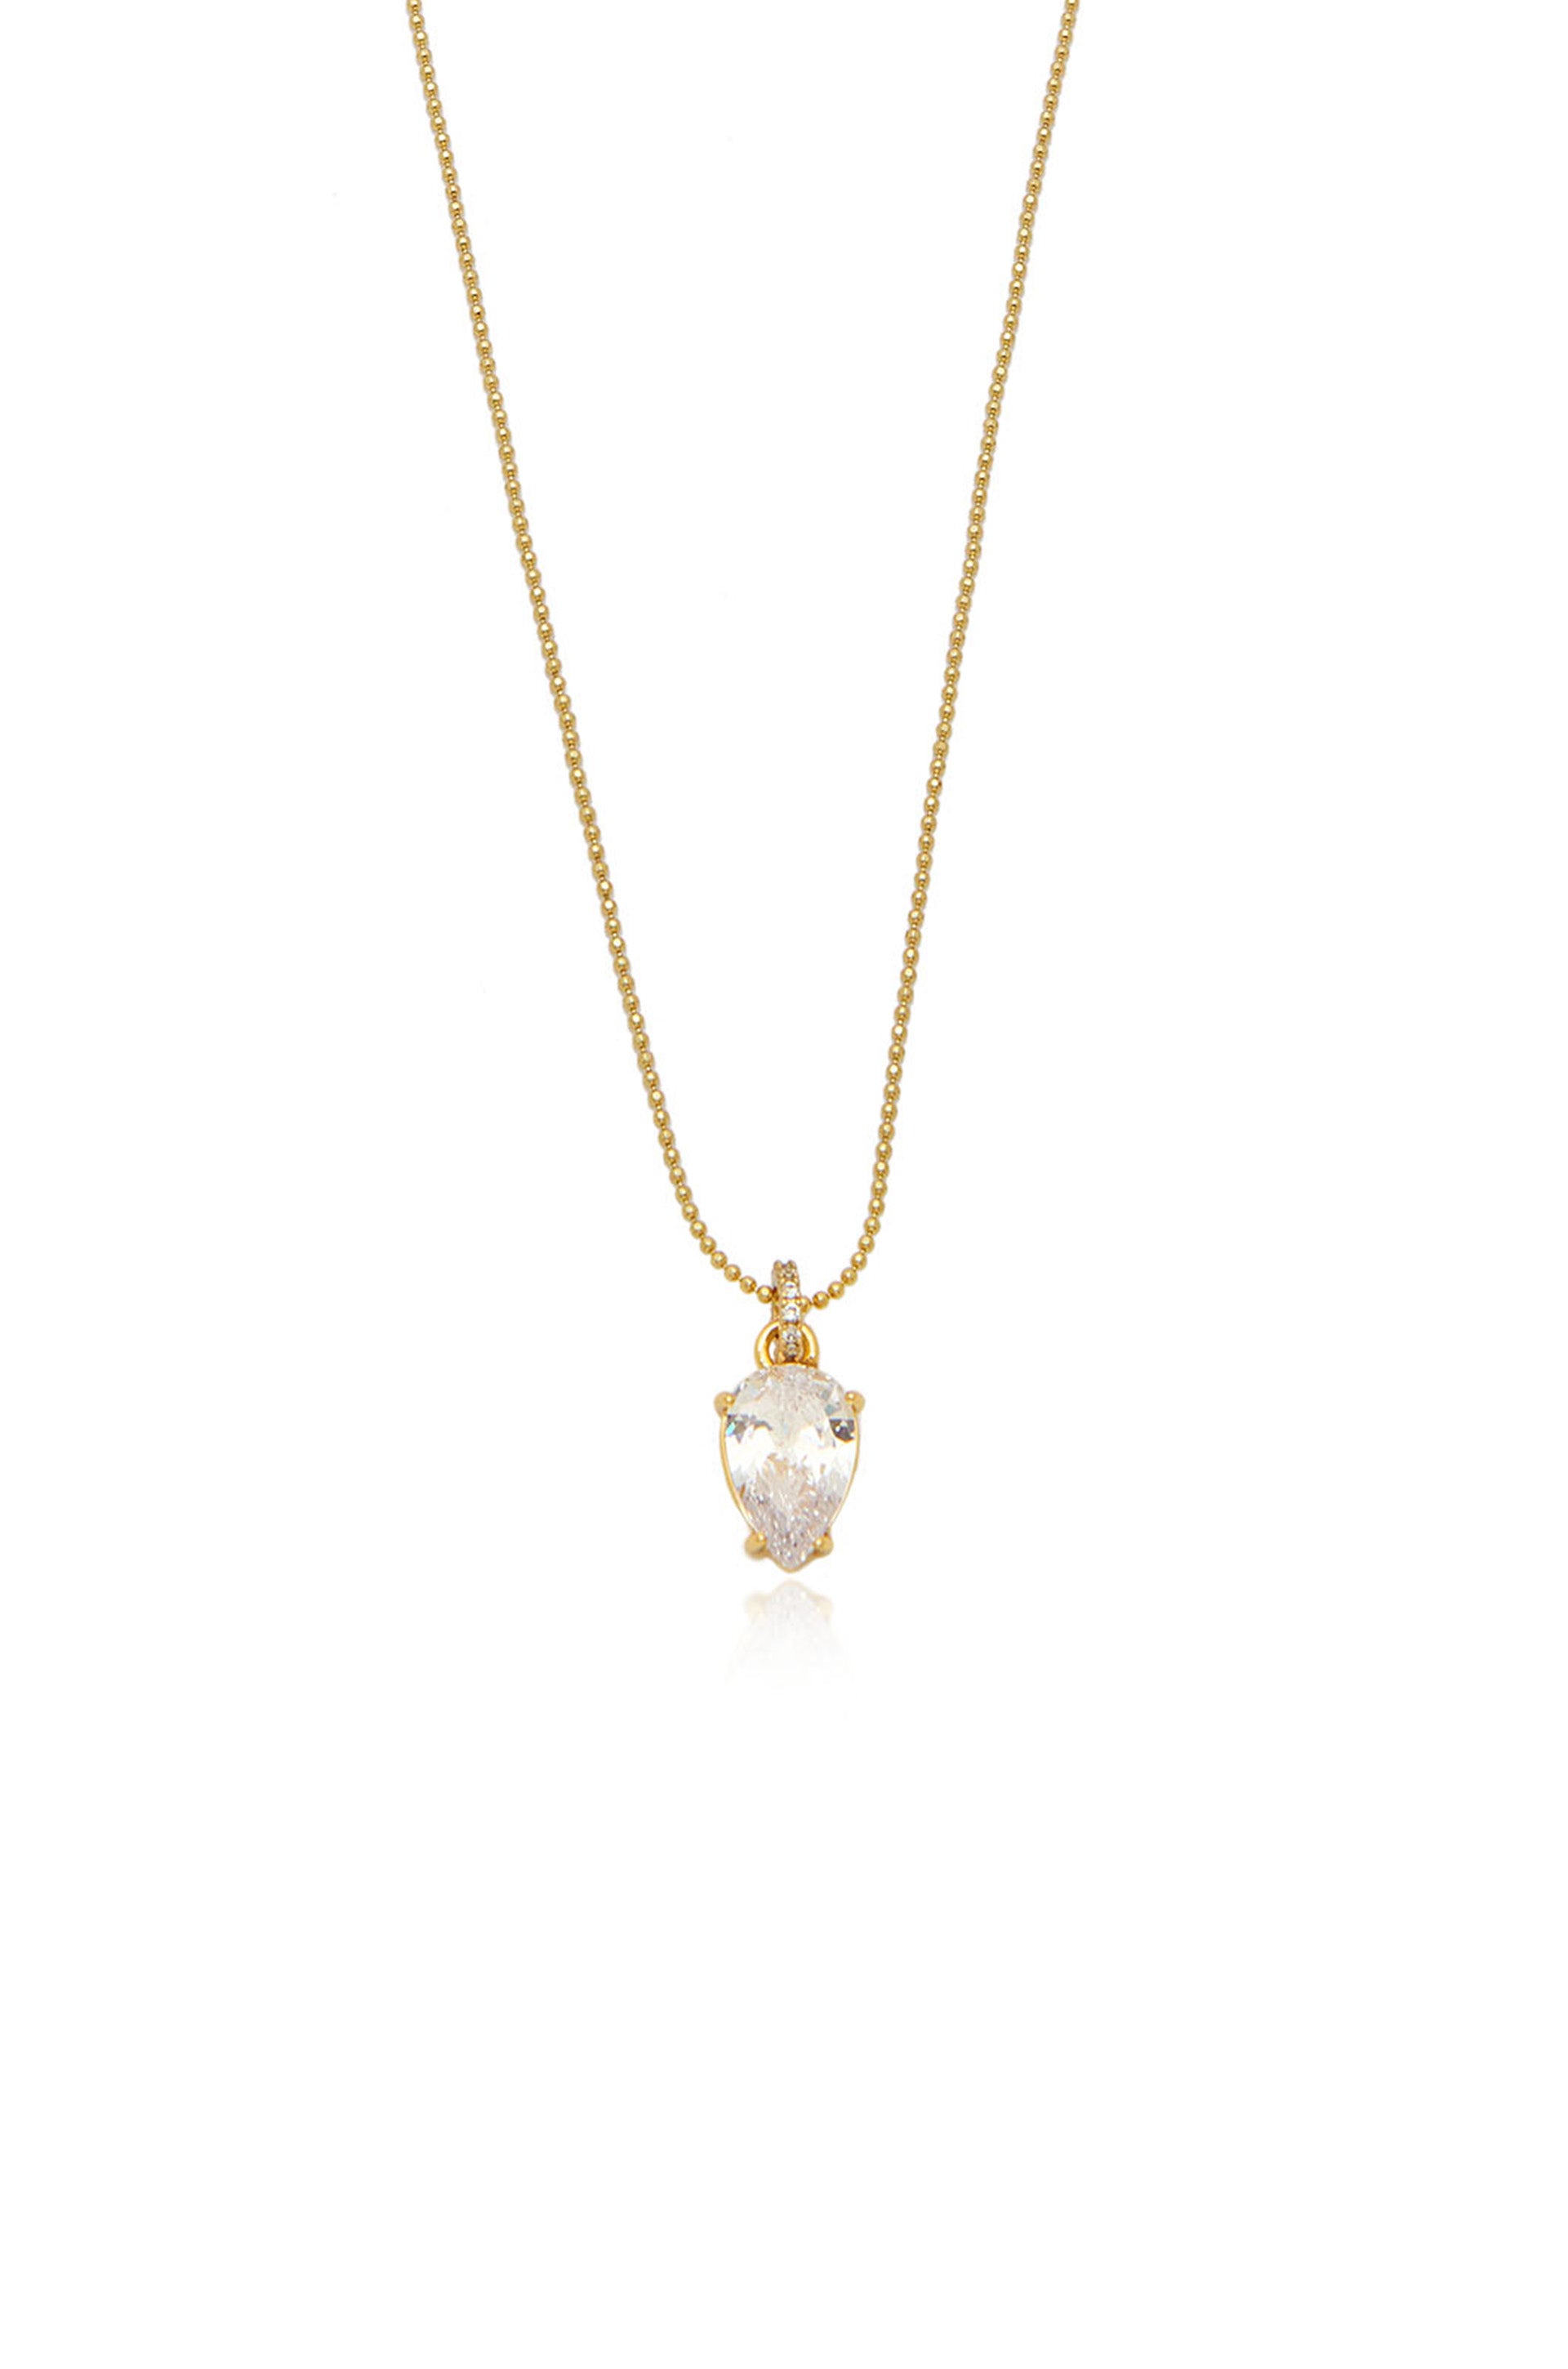 Thin and Delicate 18k Gold Plated Crystal Pendant Necklace close